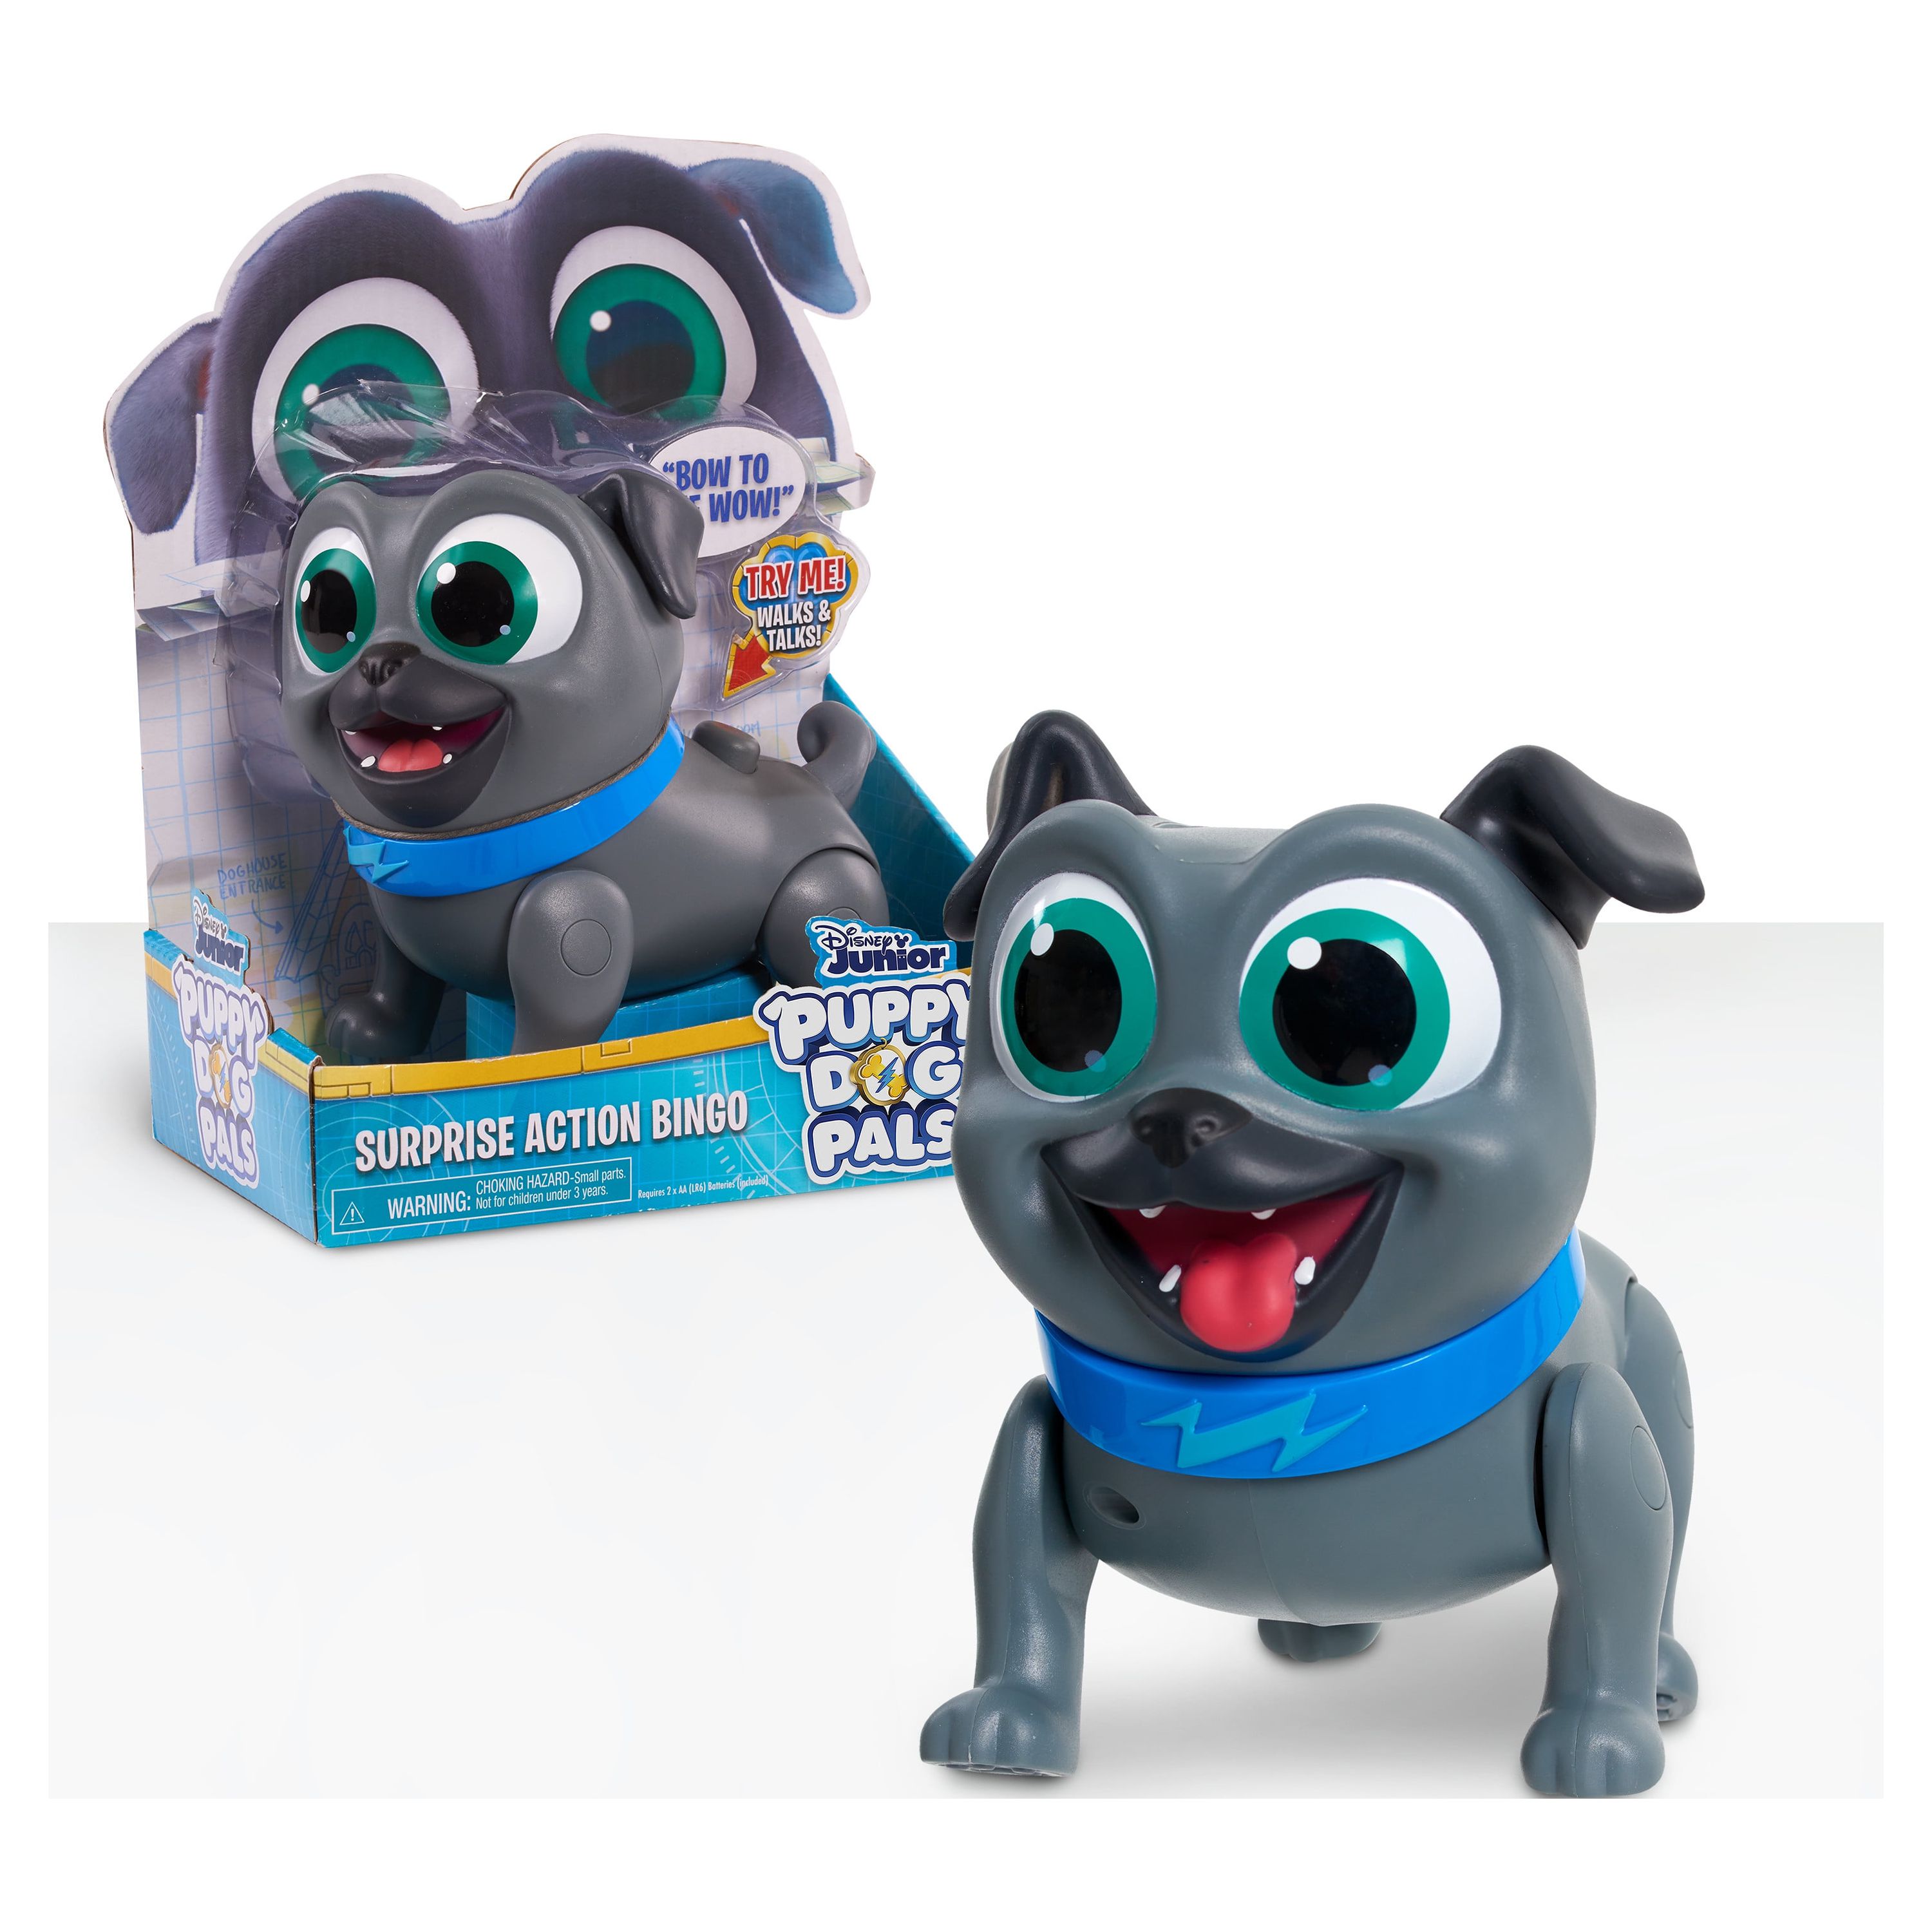 Puppy Dog Pals Surprise Action Figure, Bingo, Officially Licensed Kids Toys for Ages 3 Up, Gifts and Presents - image 1 of 6